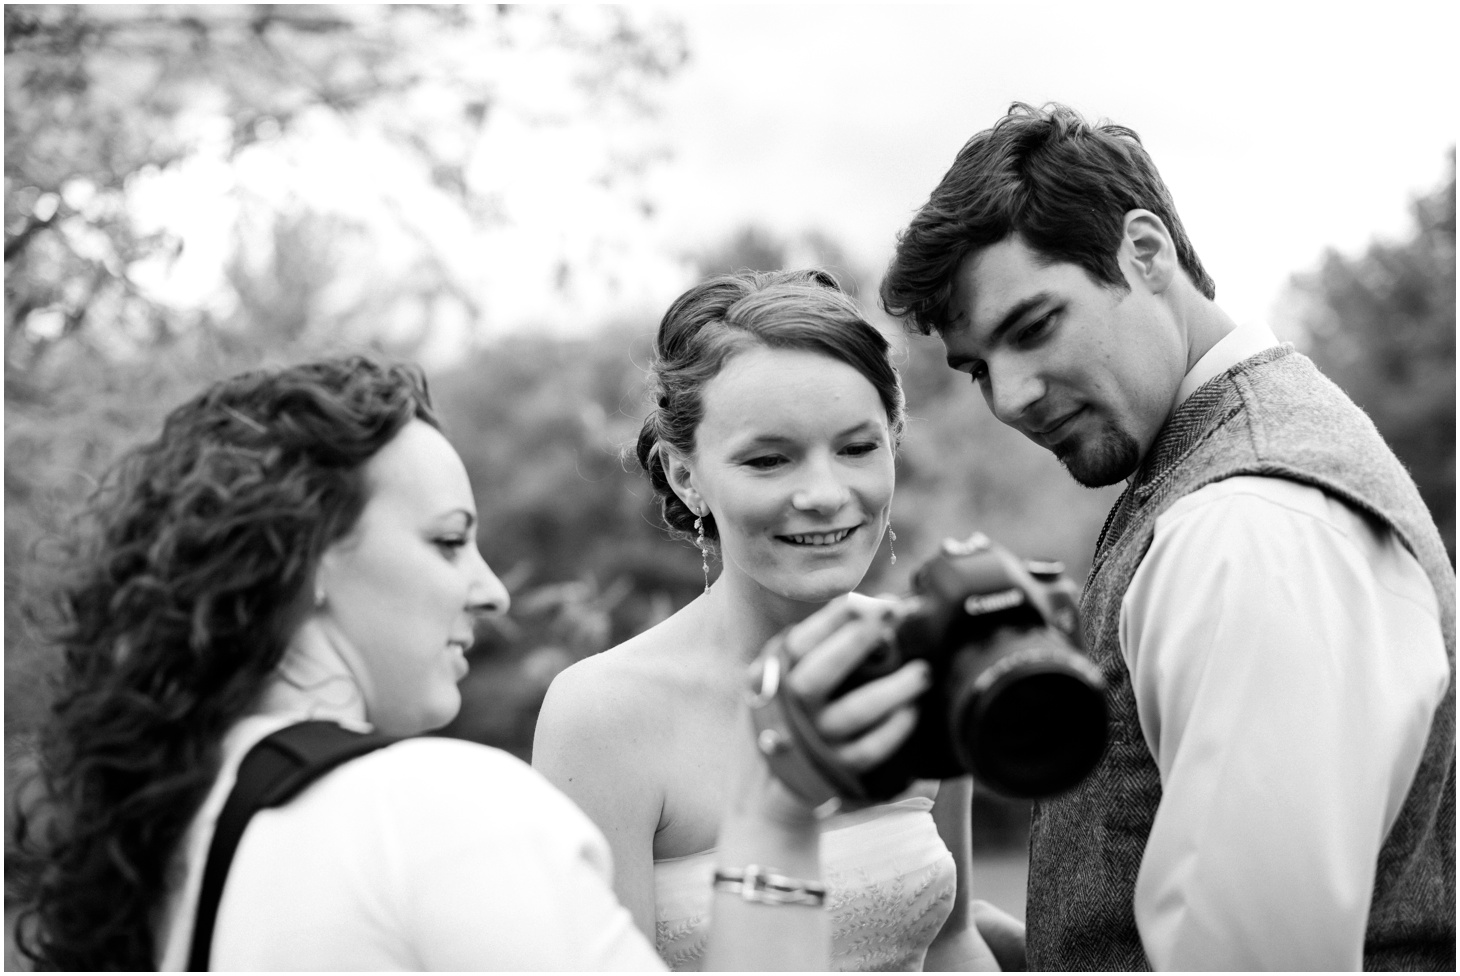 Behind the Scenes in 2014 - Weddings by Sarah Bradshaw Photography_0106